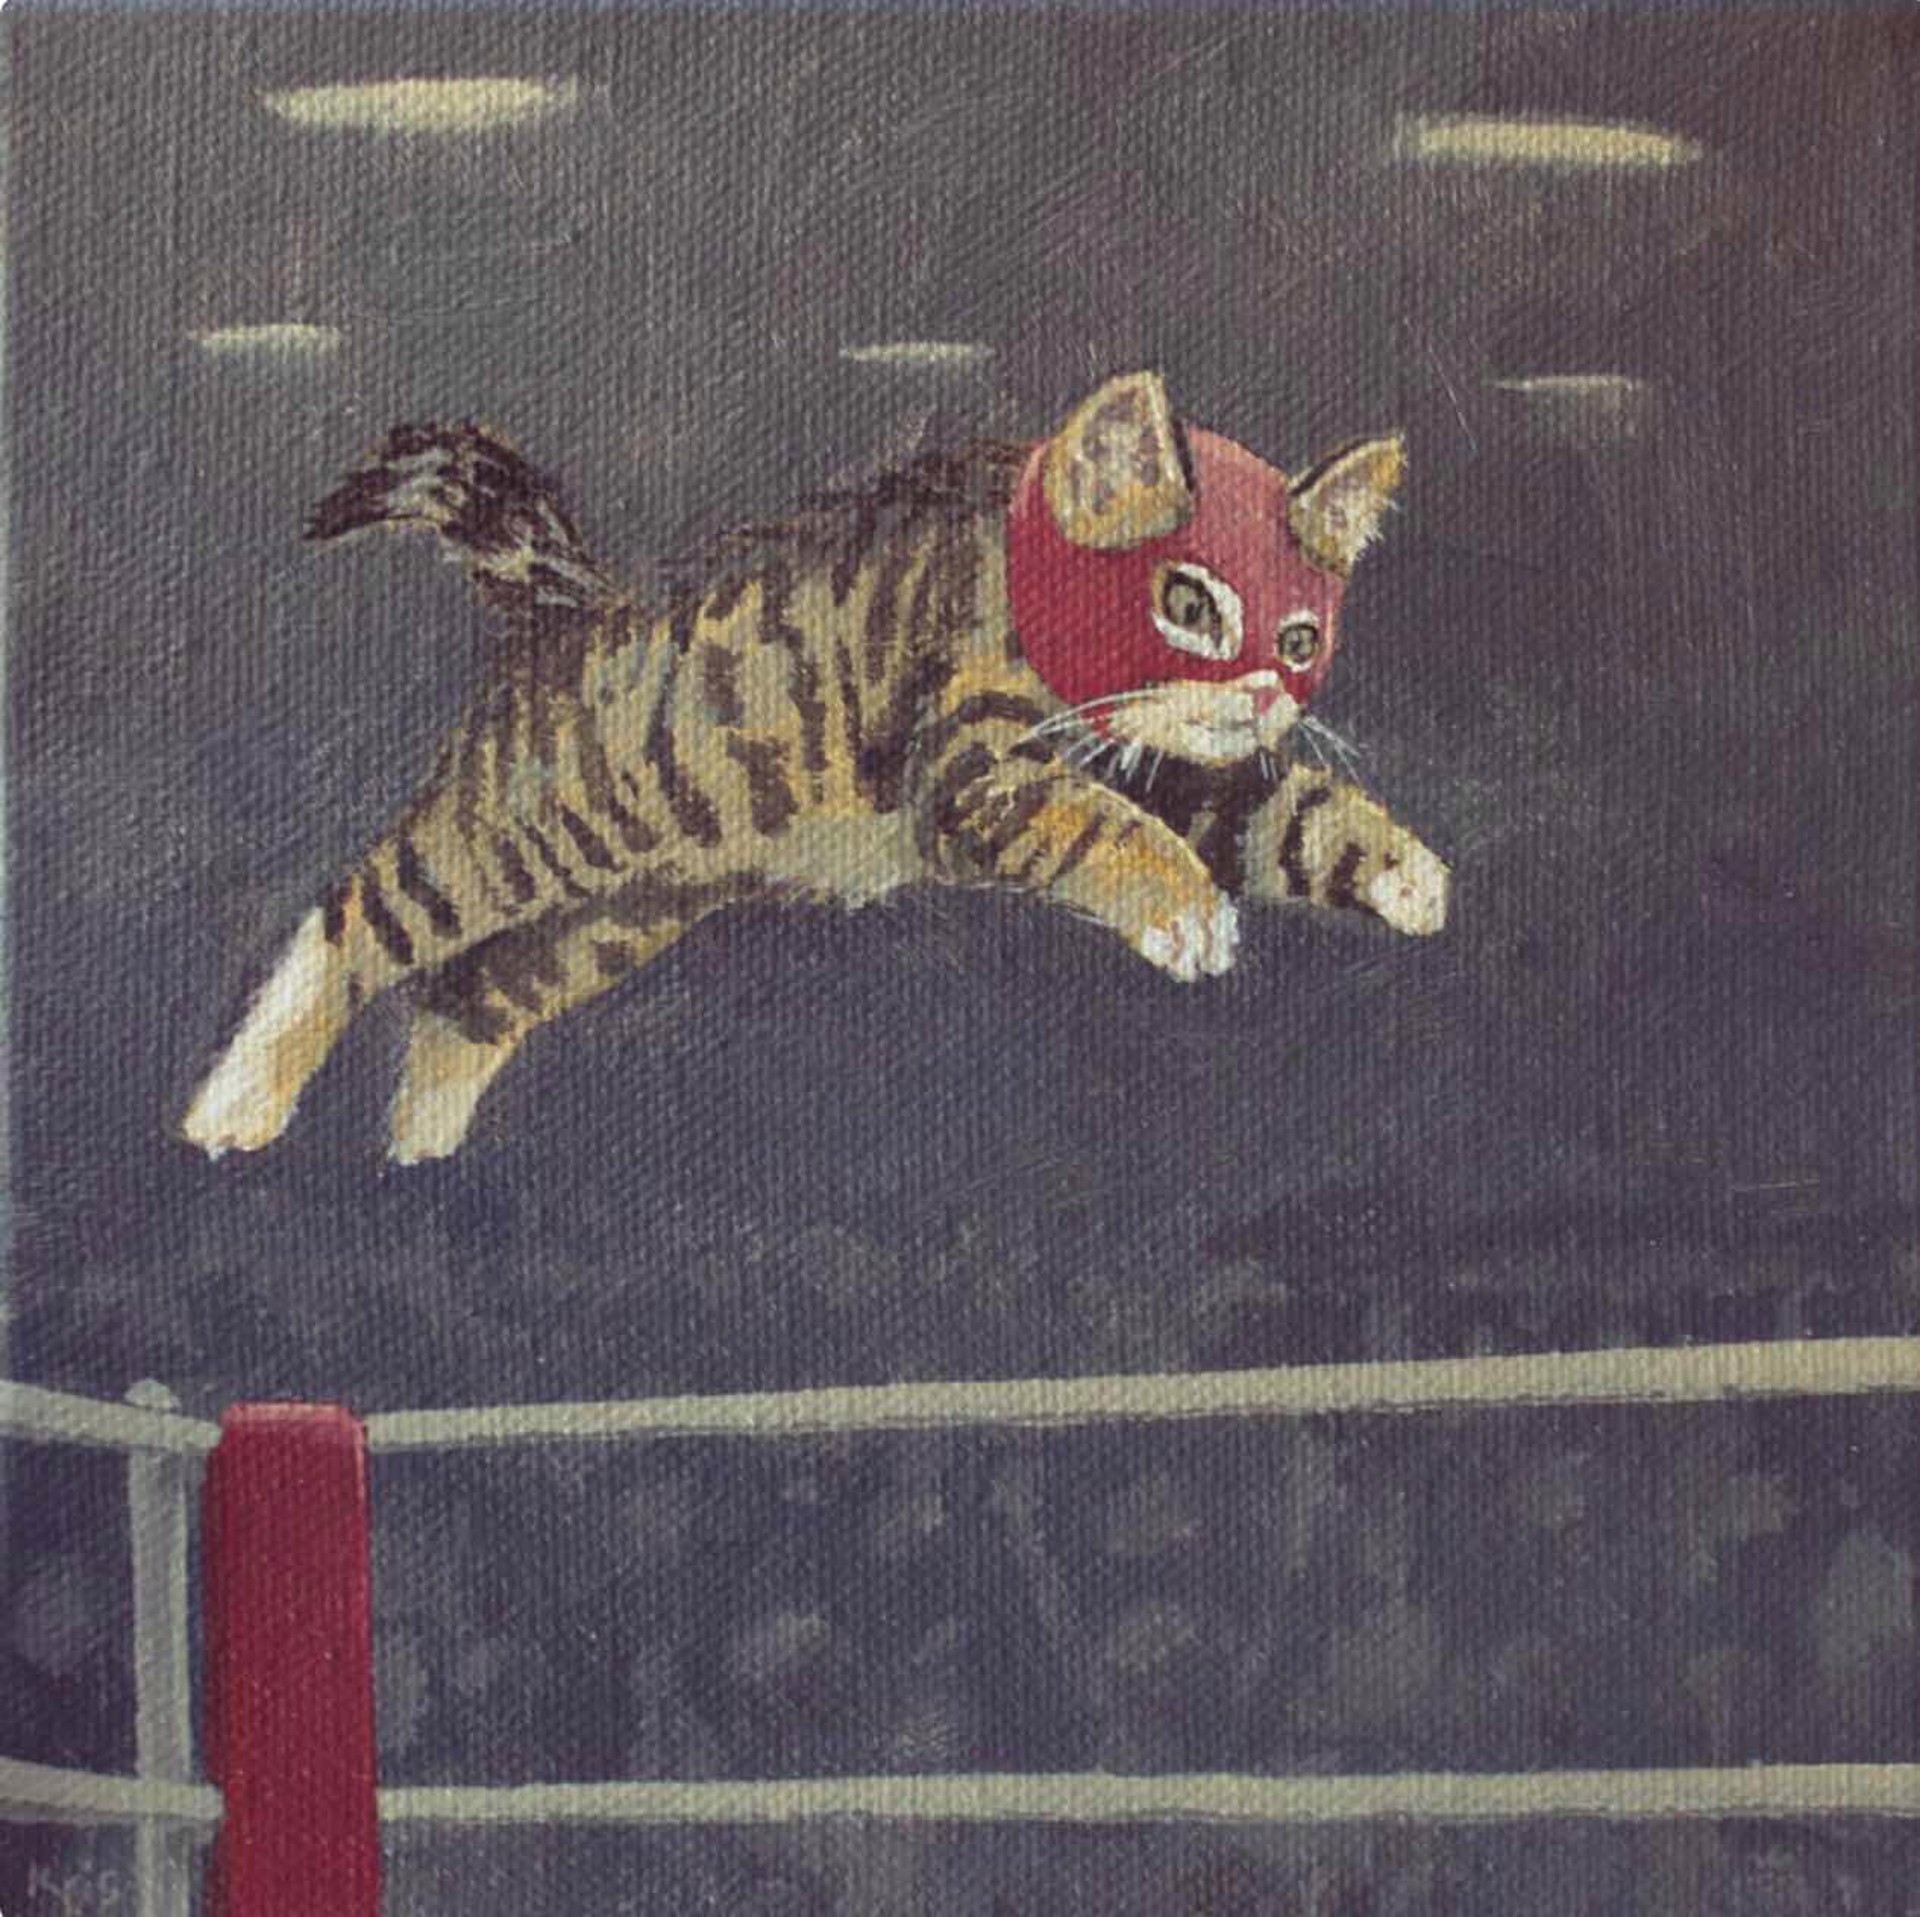 Luchador Kitty (Giclee on Deckled Paper) G.O. by Liese Chavez